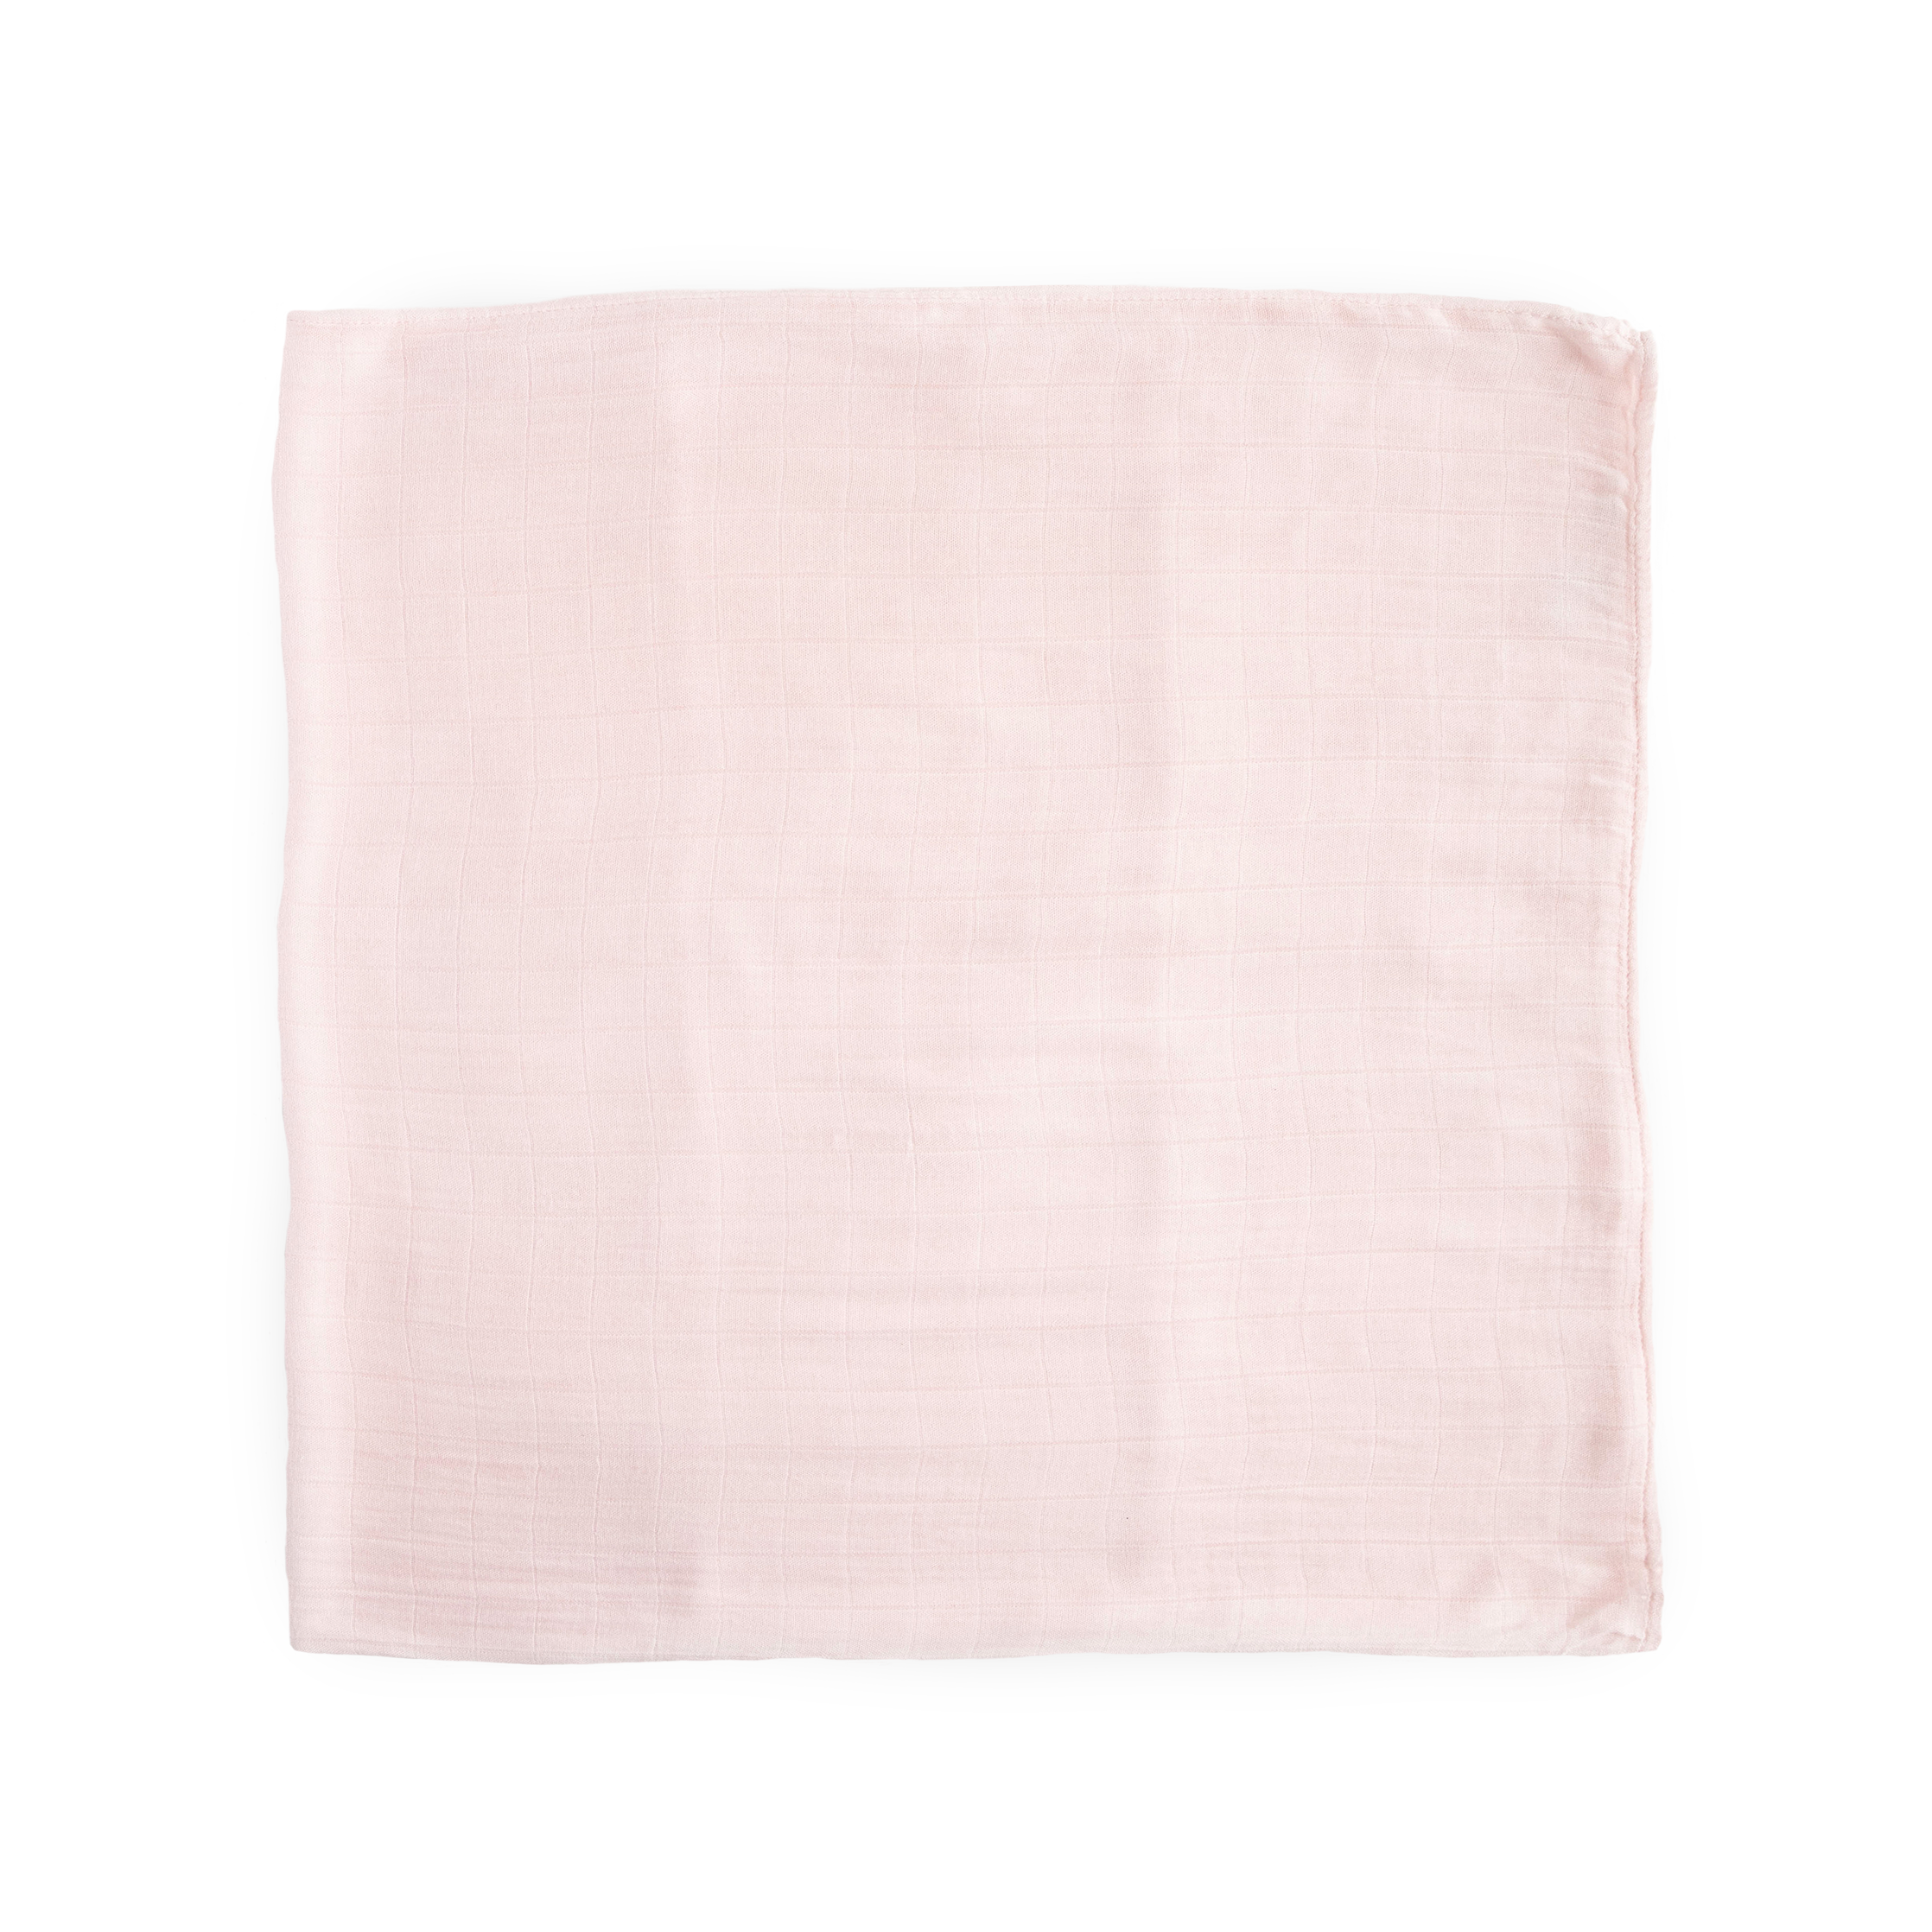 Deluxe Muslin Swaddle Blanket 2 Pack - Blush Peony